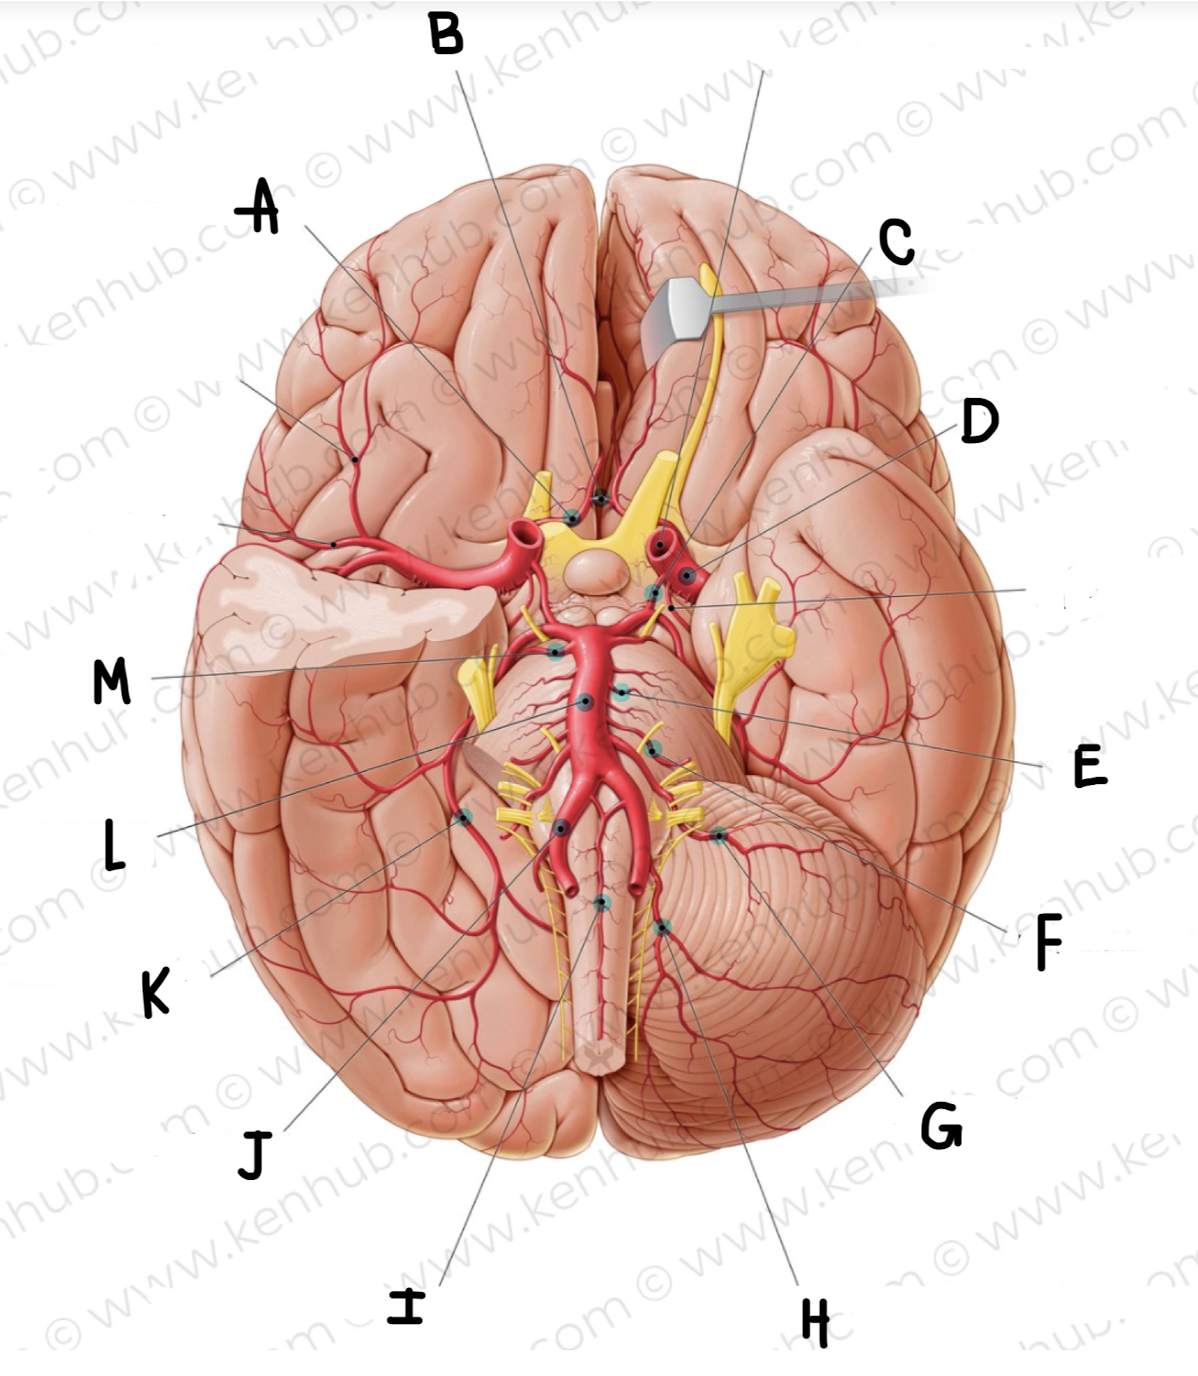 <p>What is the name of the artery labeled C?</p>